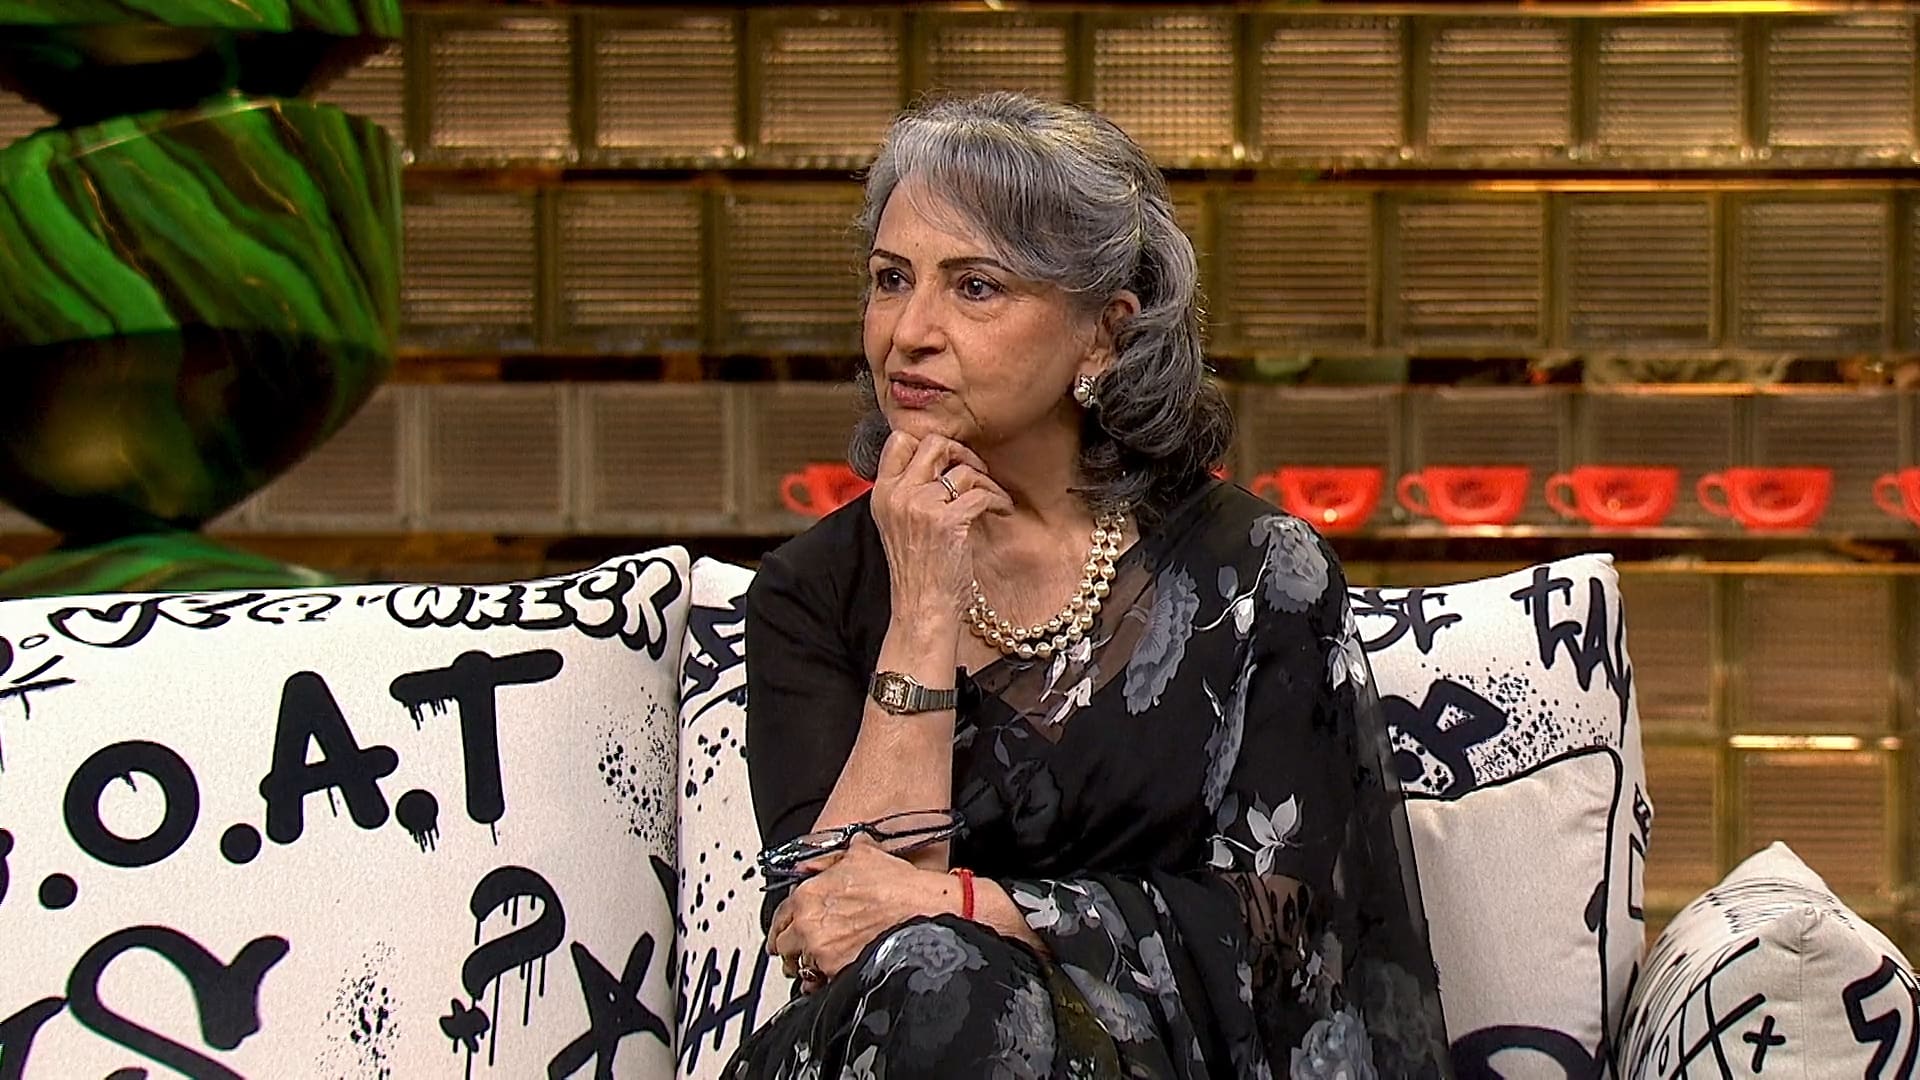 Sharmila Tagore recently revealed on an episode of Koffee with Karan 8 that she was diagnosed with breast cancer